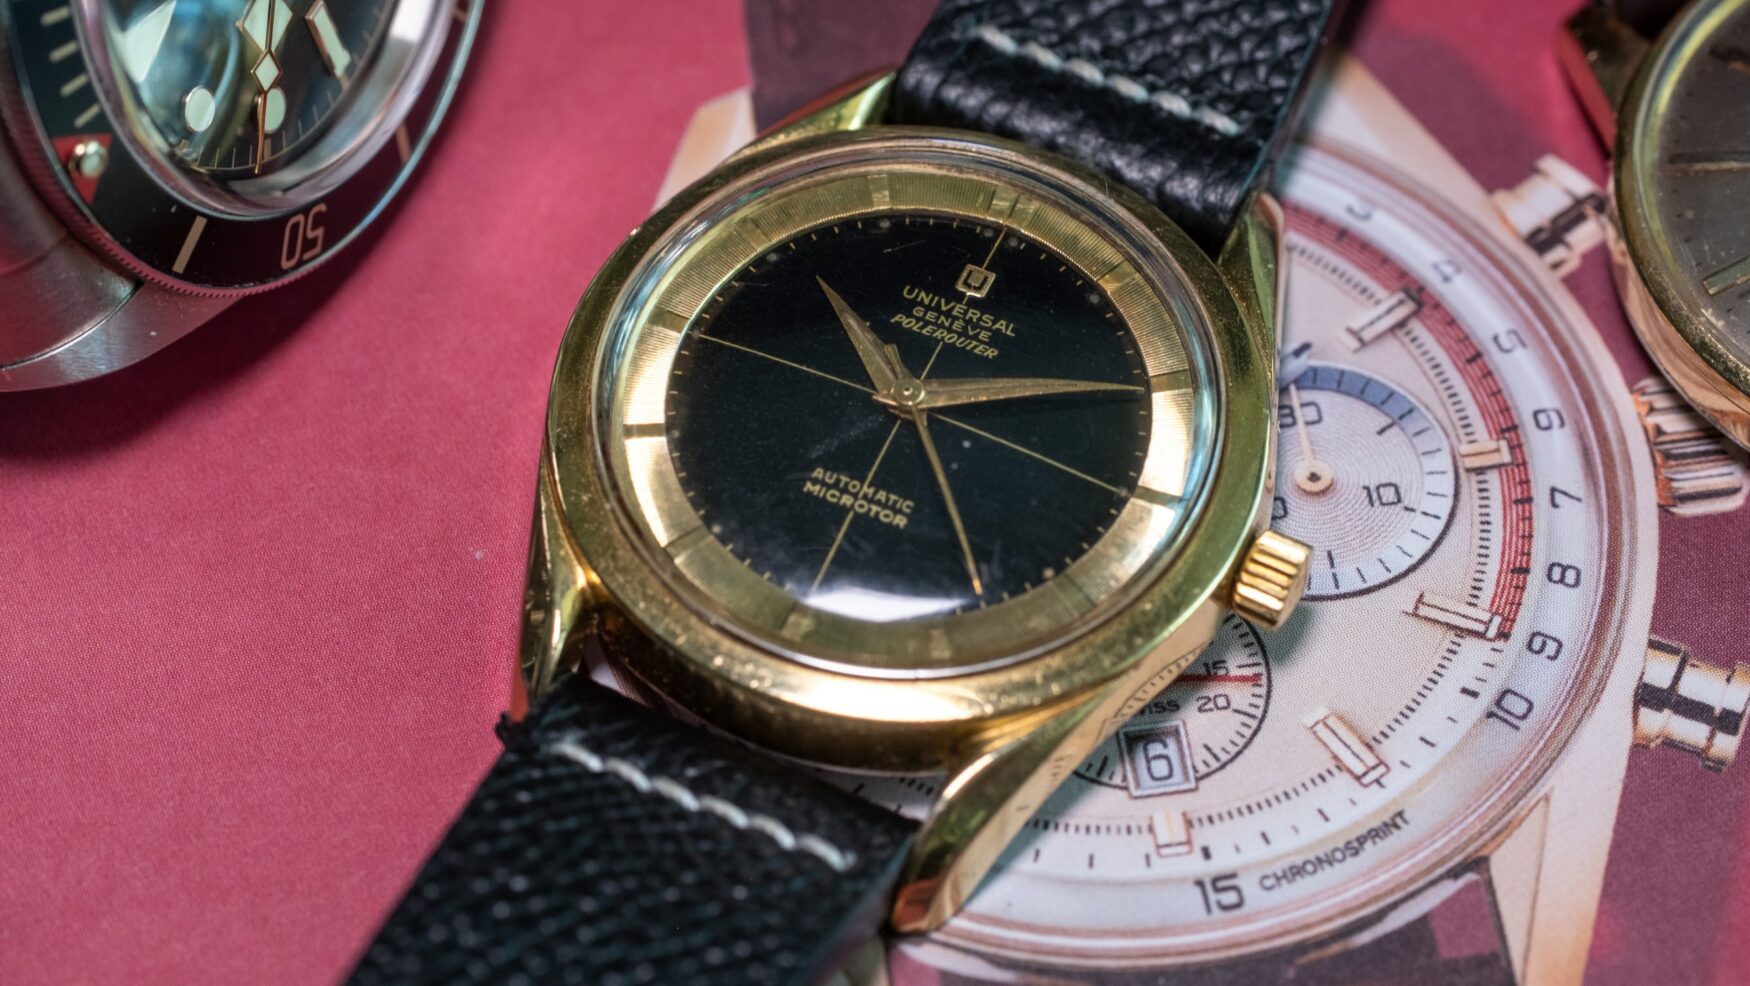 What would a return of the Universal Genève Polerouter look like?